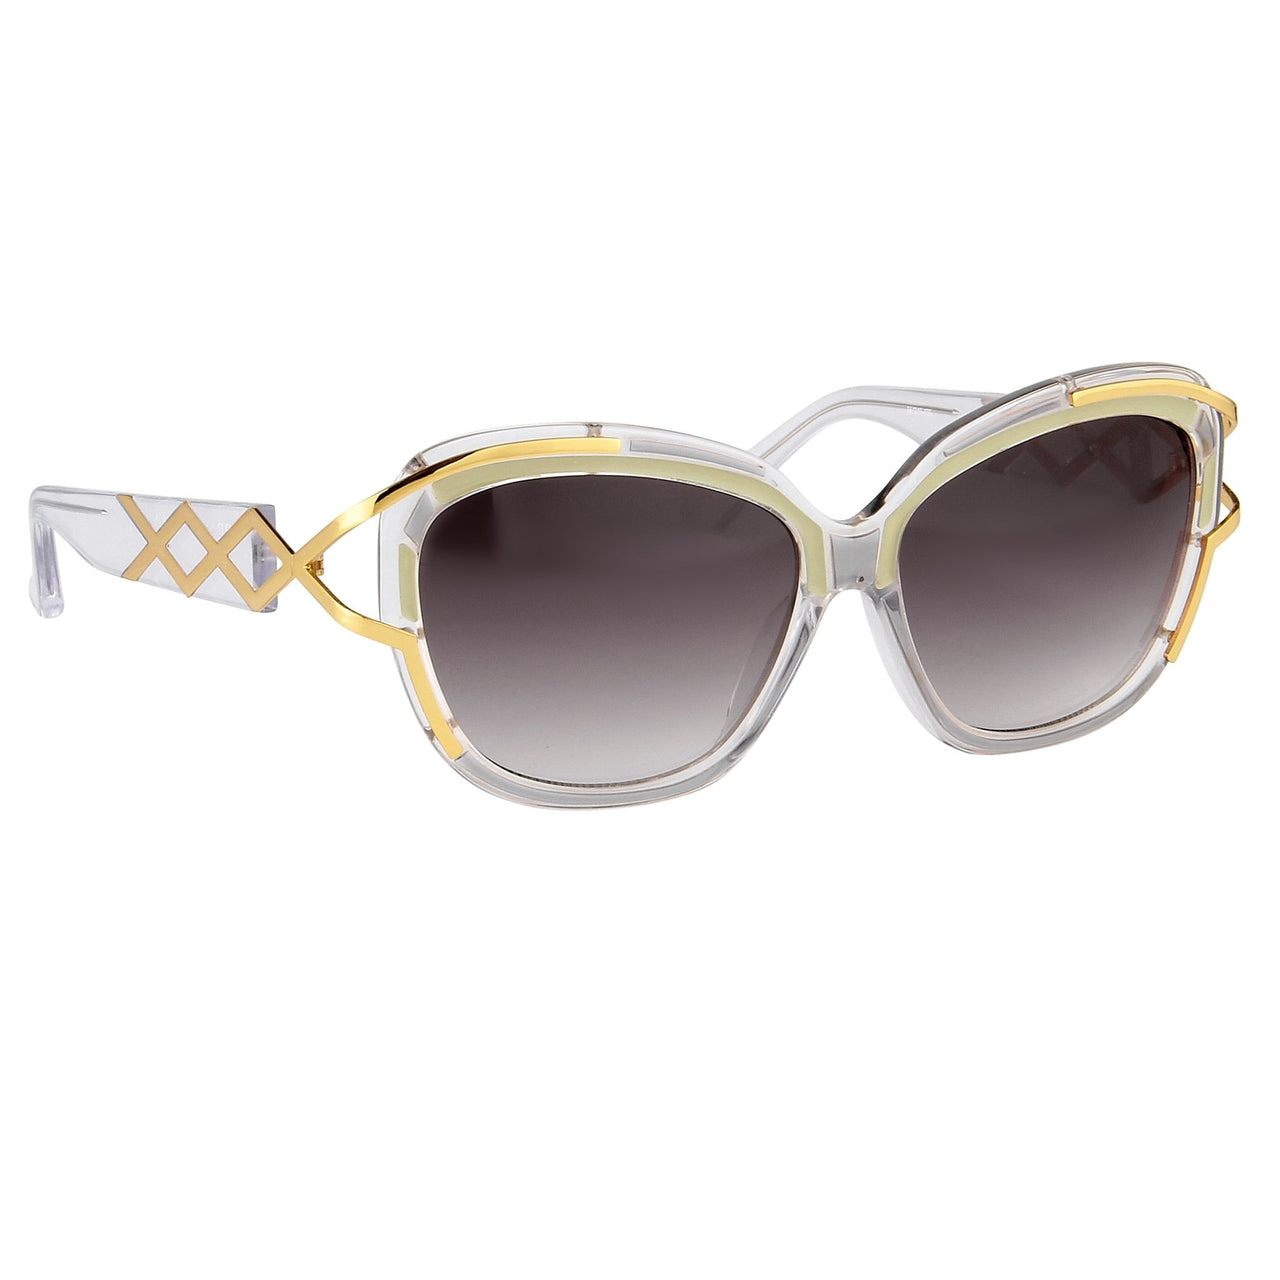 Prabal Gurung Sunglasses Square Clear Olive With Grey Category 3 Graduated Lenses PG8C1SUN - Watches & Crystals